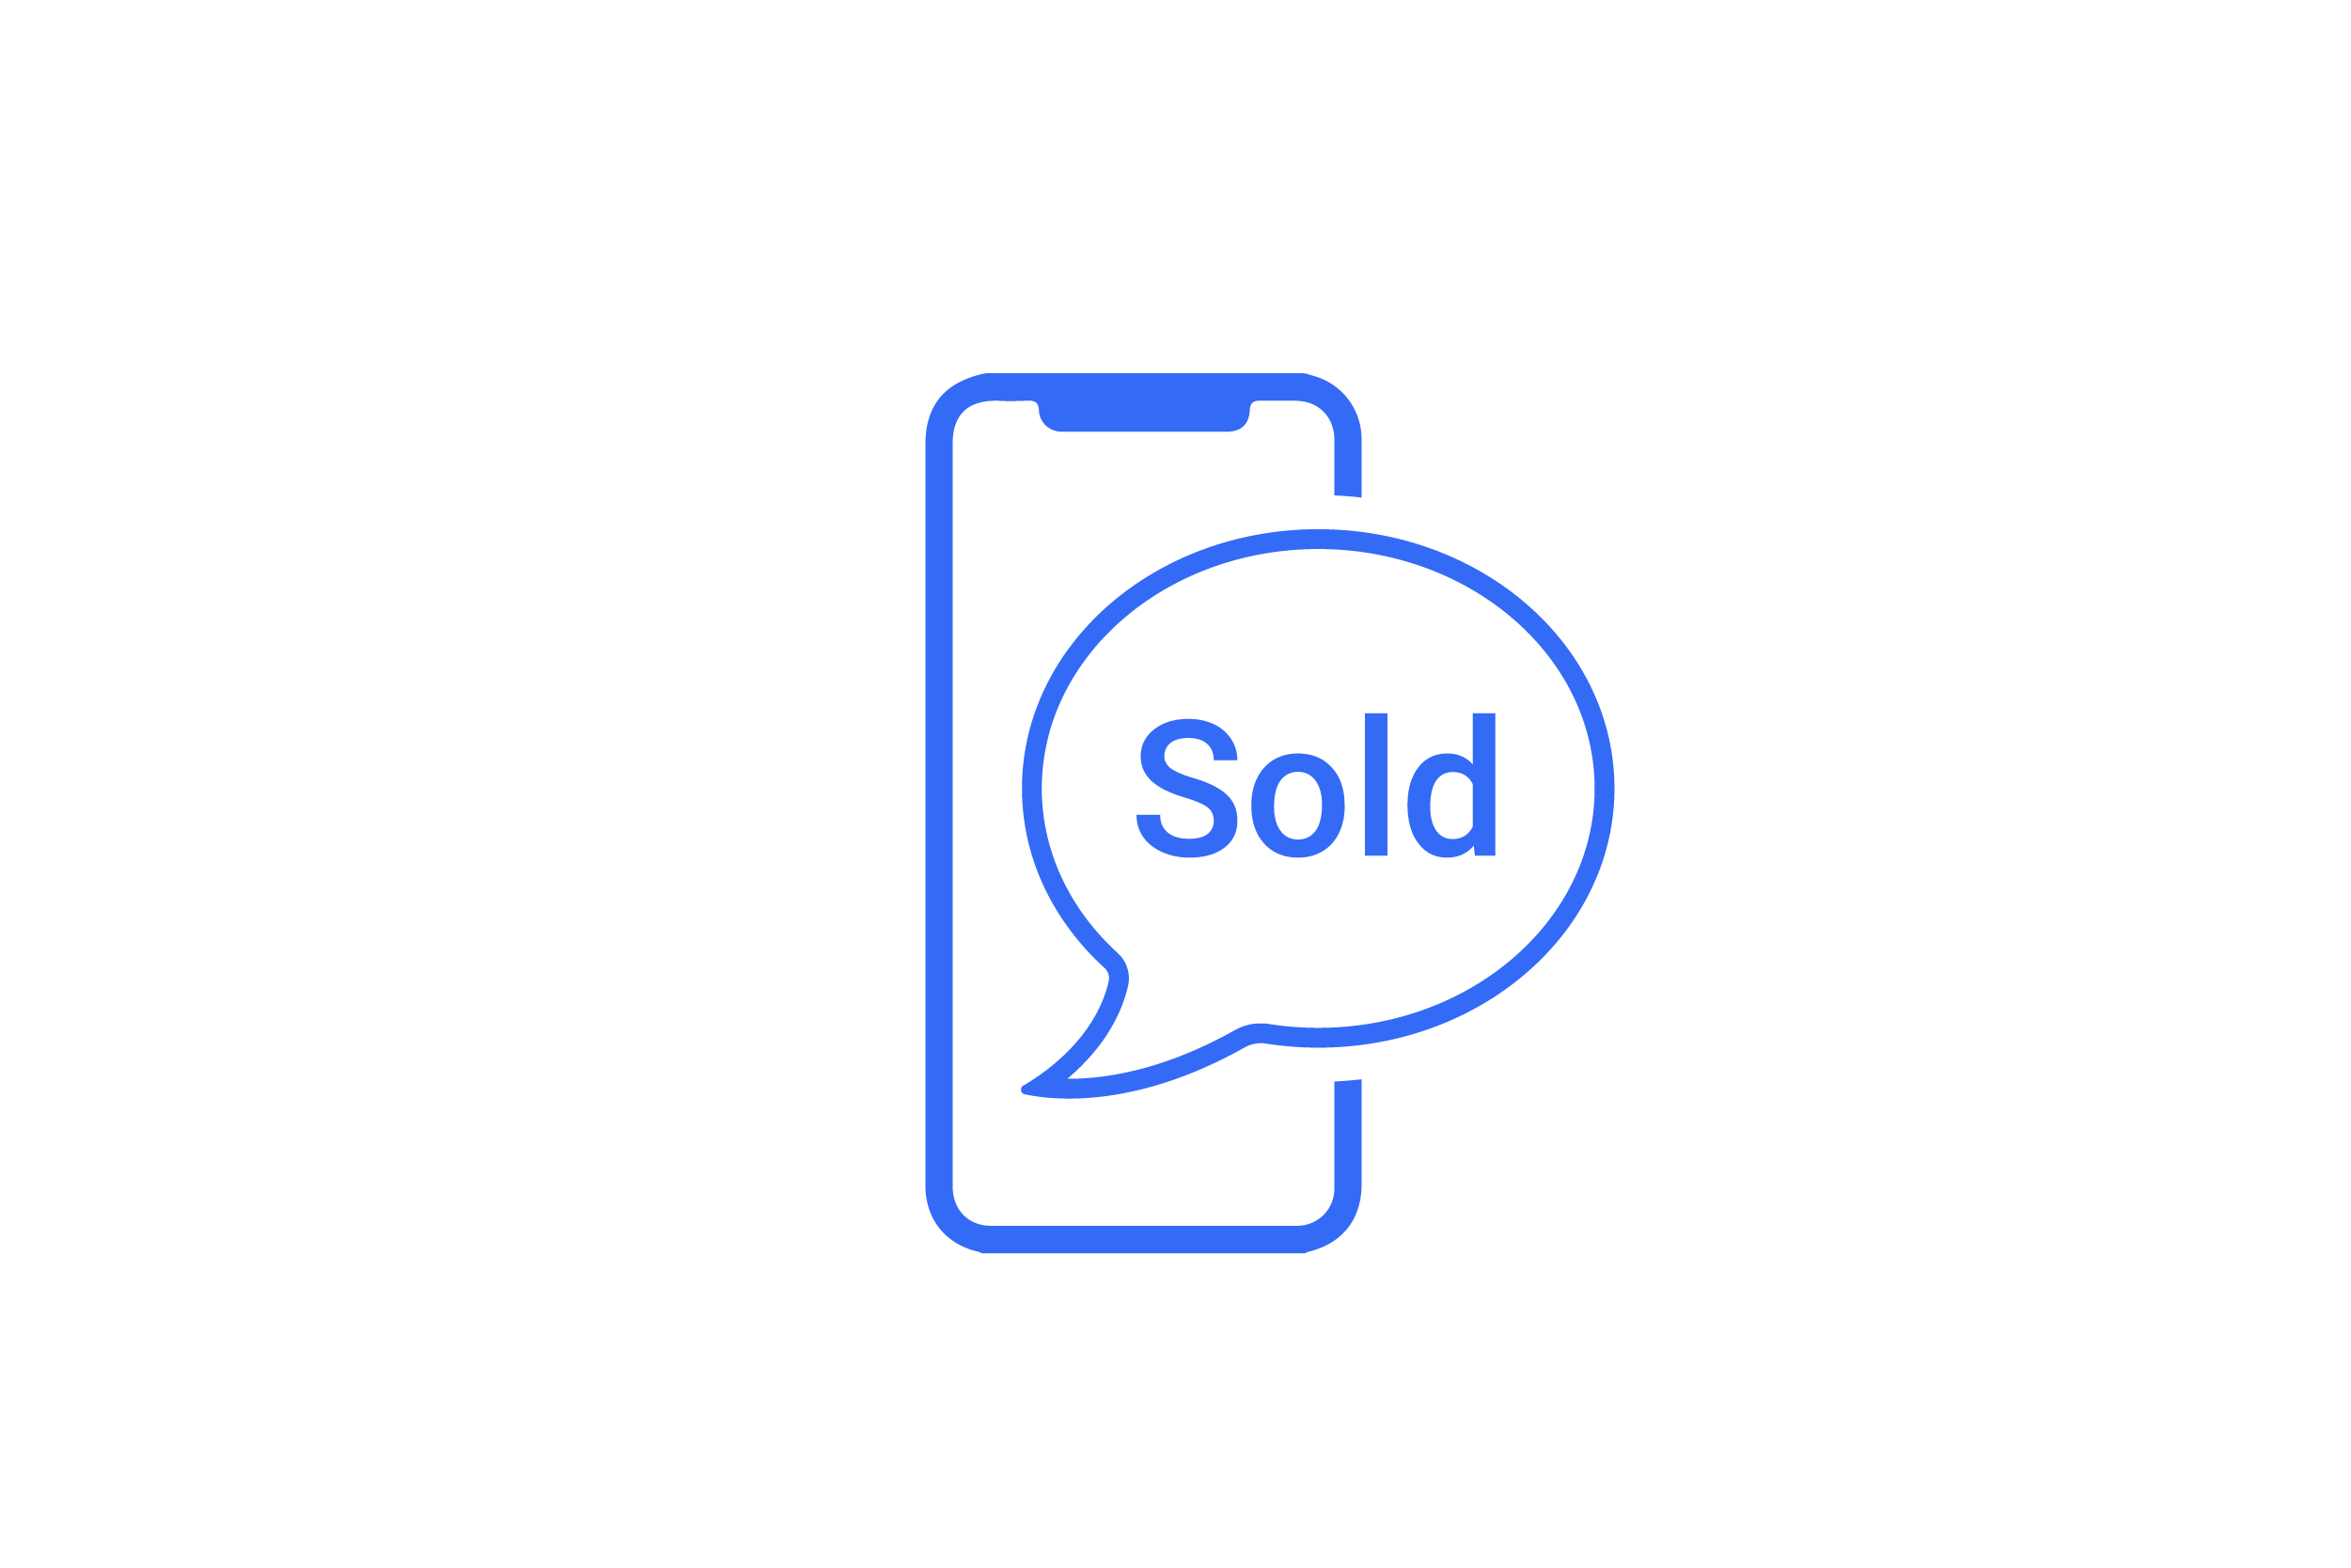 Sell. iPhone with 'Sold' speech bubble inside of it. 